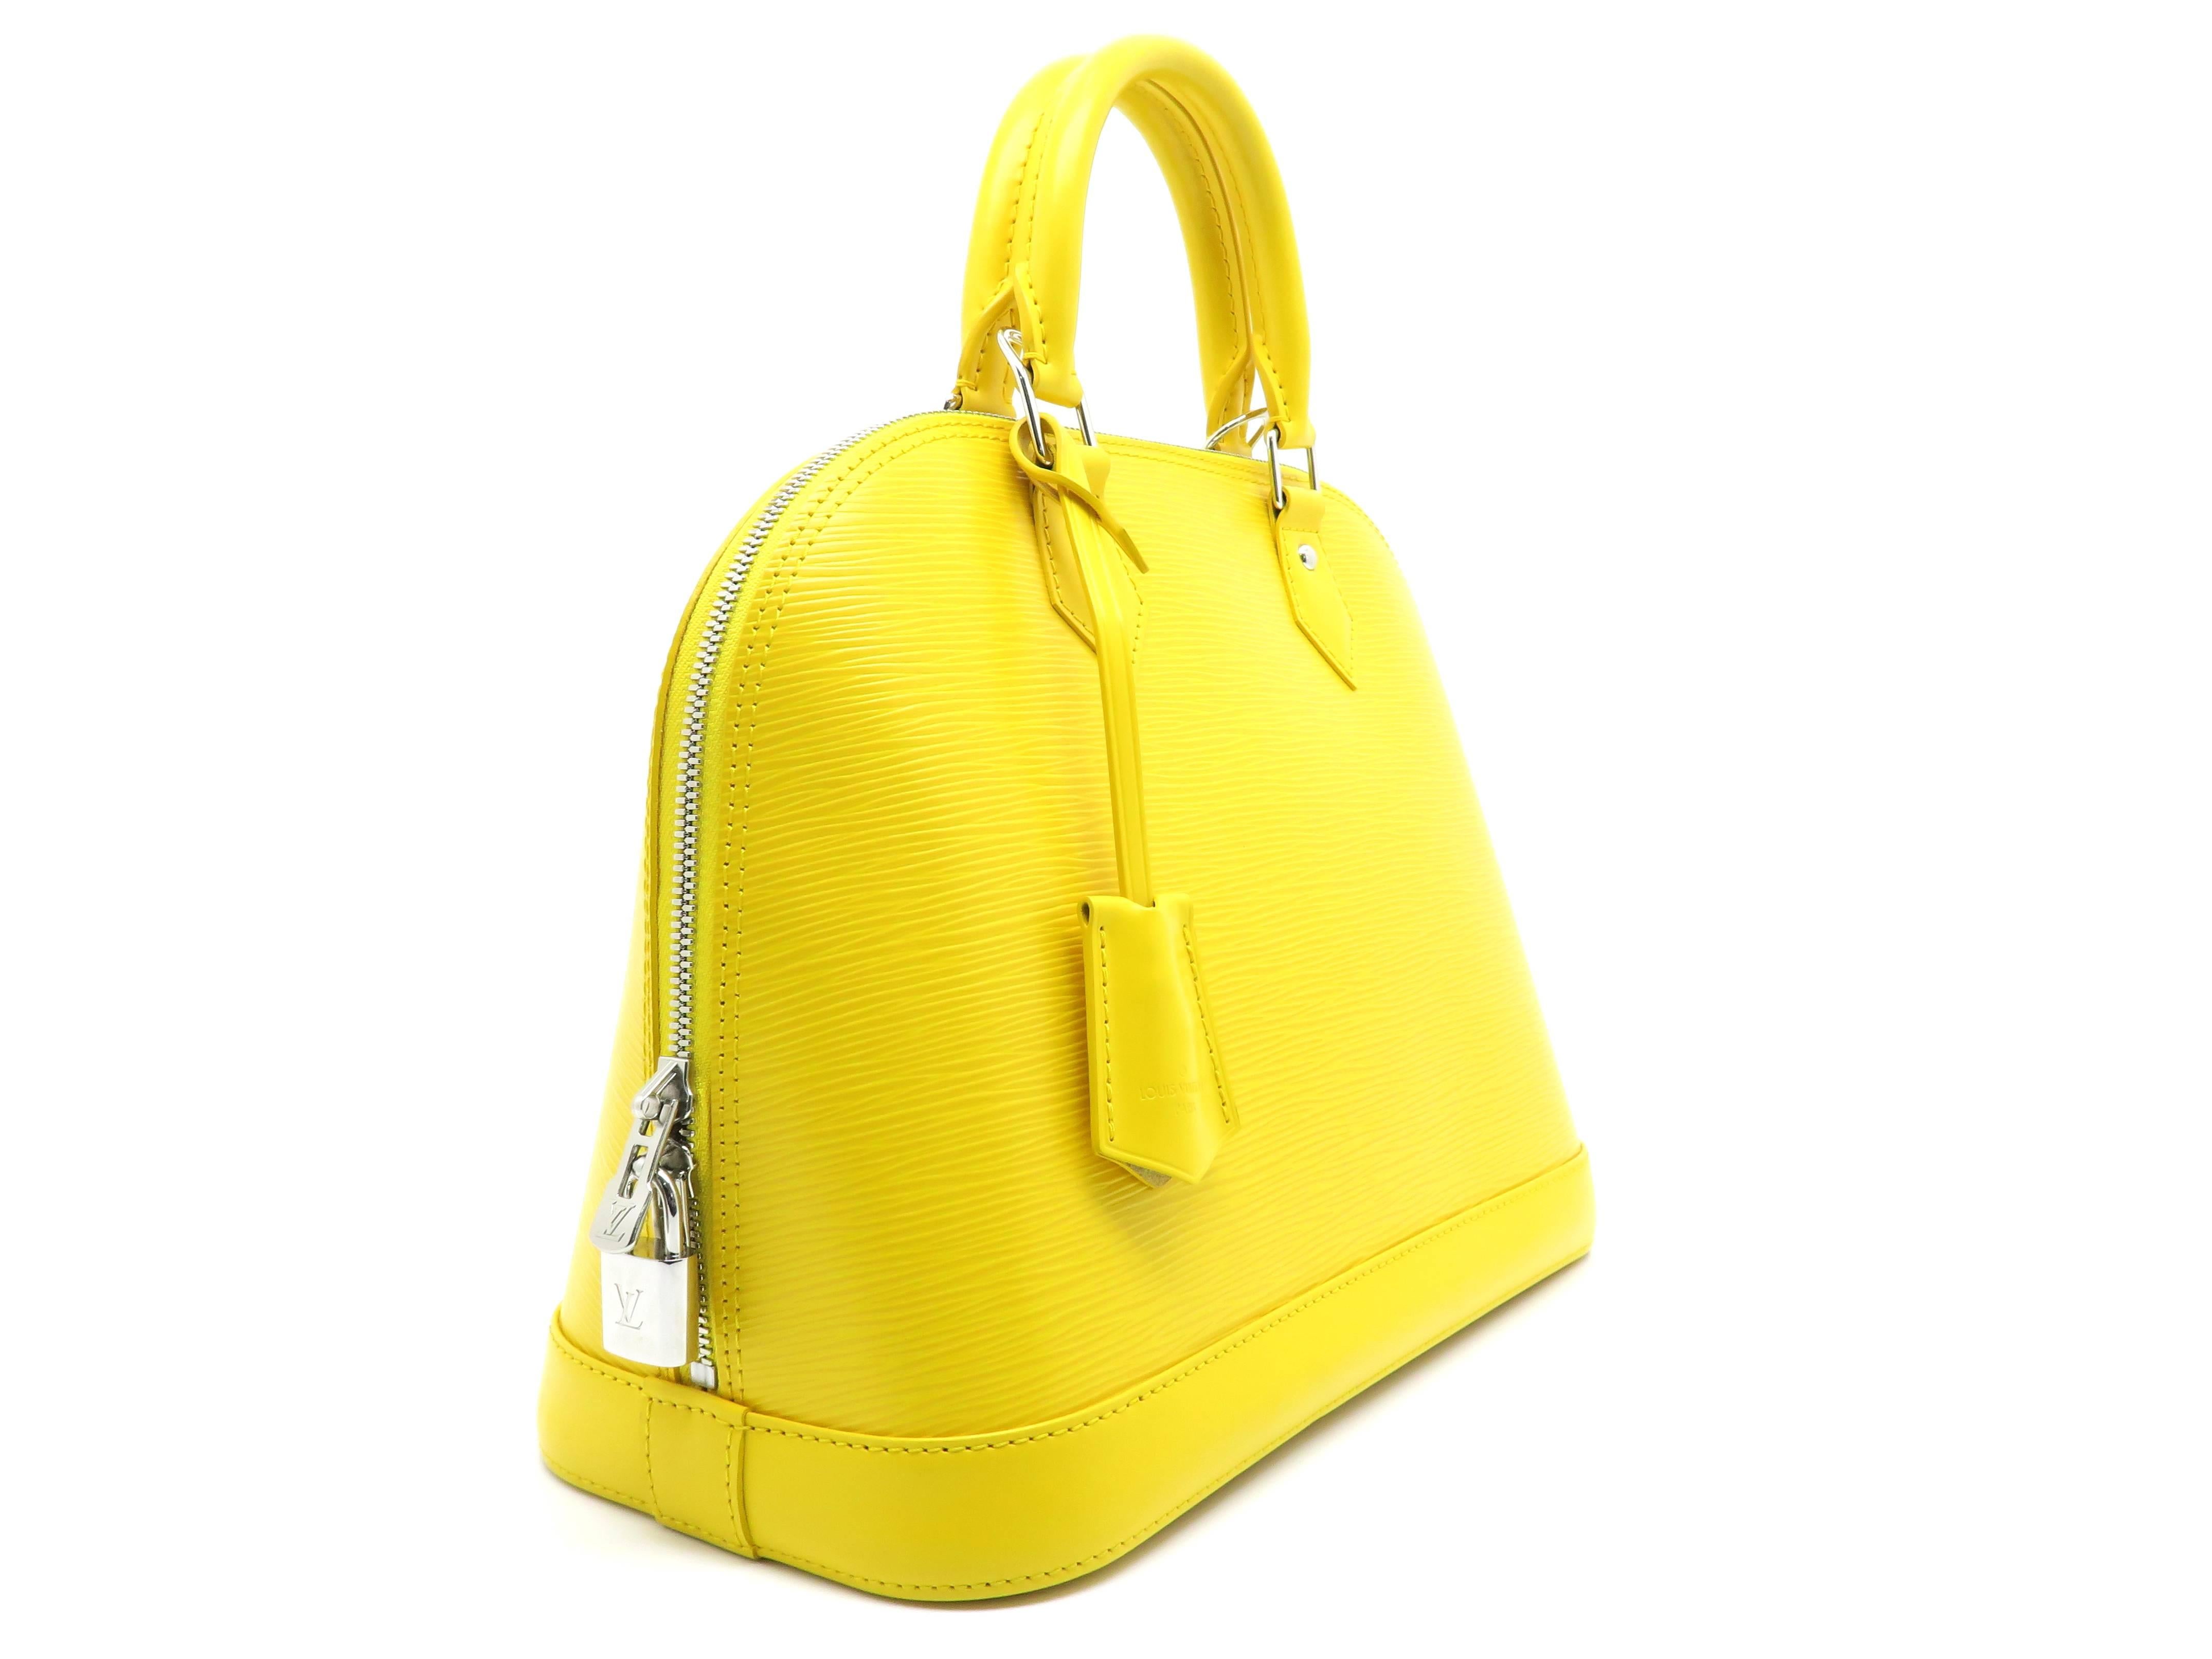 Color: Yellow
Material: Epi Leather

Condition: Rank S
Overall: Almost New
Surface: Good
Corners : Good
Edges: Good 
Handles/Straps: Good 
Hardware: Good
Bottom : Minor Stains

Dimension: W32 × H23 × D15.5cm（W12.5" × H9.0" ×